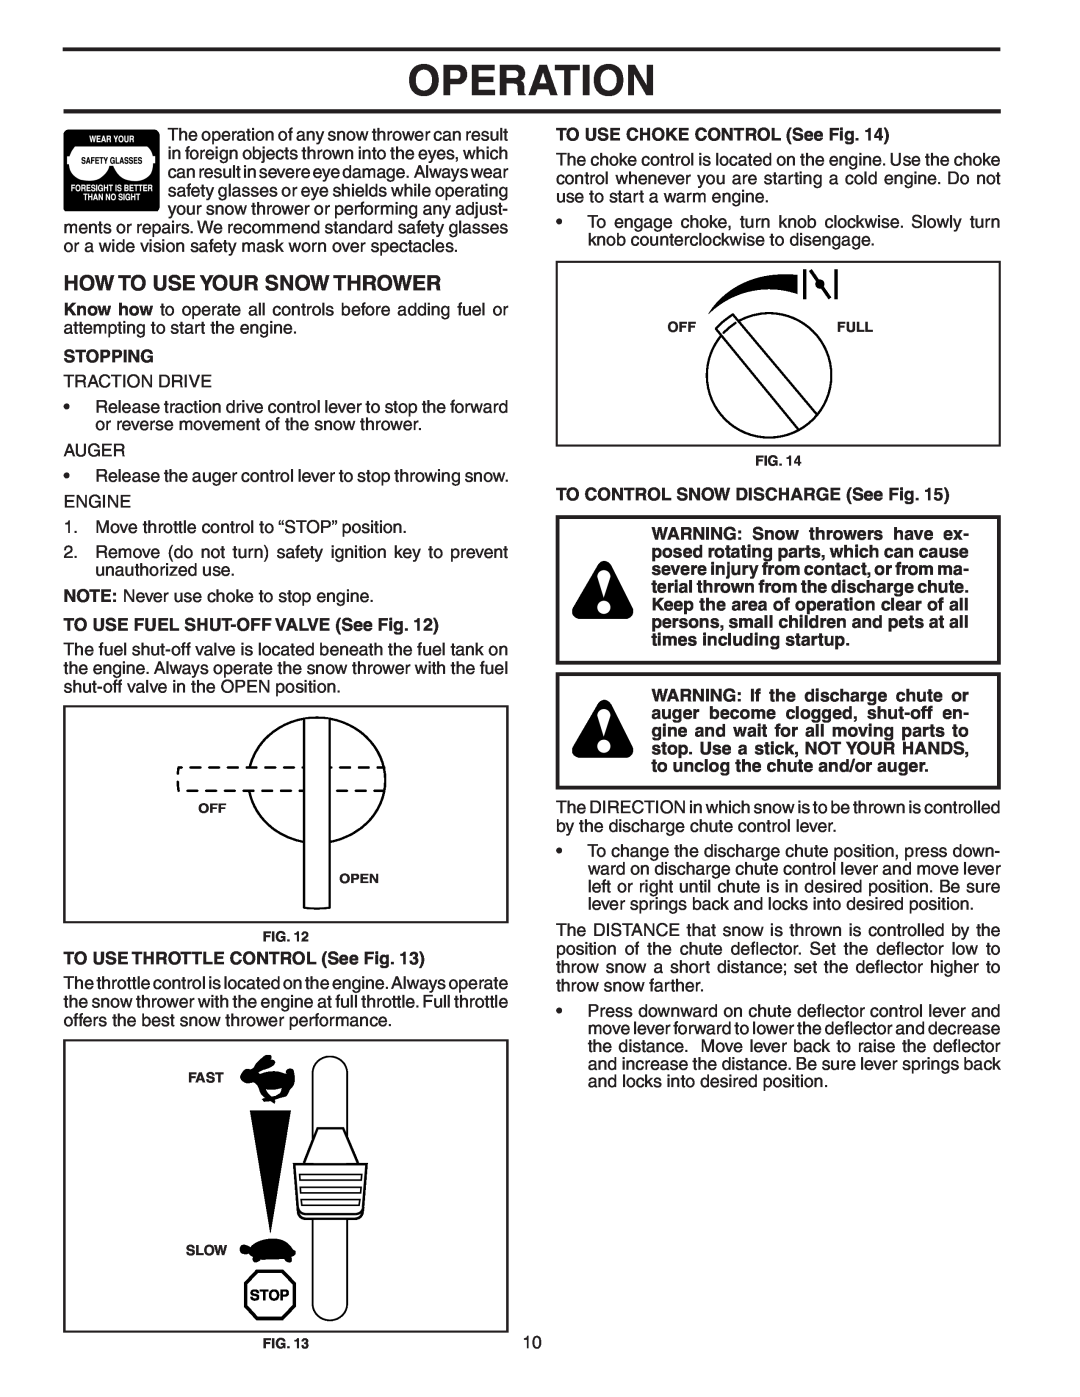 Poulan PP1130ESA owner manual How To Use Your Snow Thrower, Operation, Stopping, TO USE FUEL SHUT-OFF VALVE See Fig 